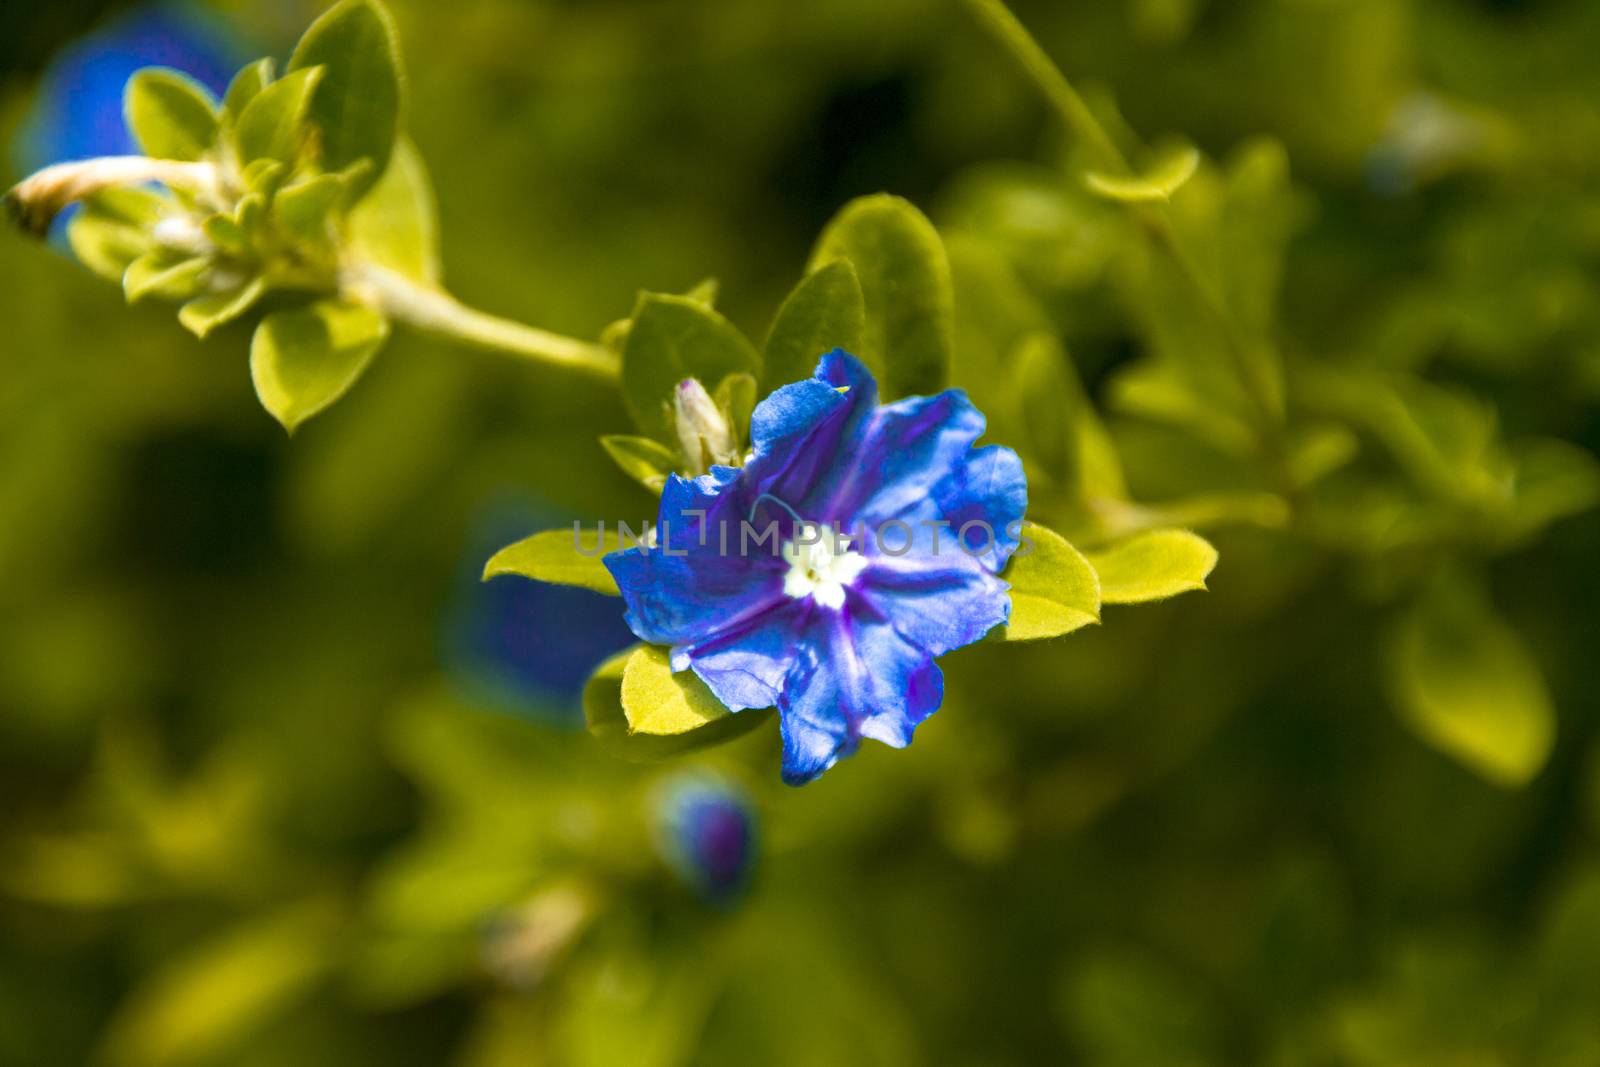 bright blue flower growing in garden shot in early morning natural daylight with shallow depth of field